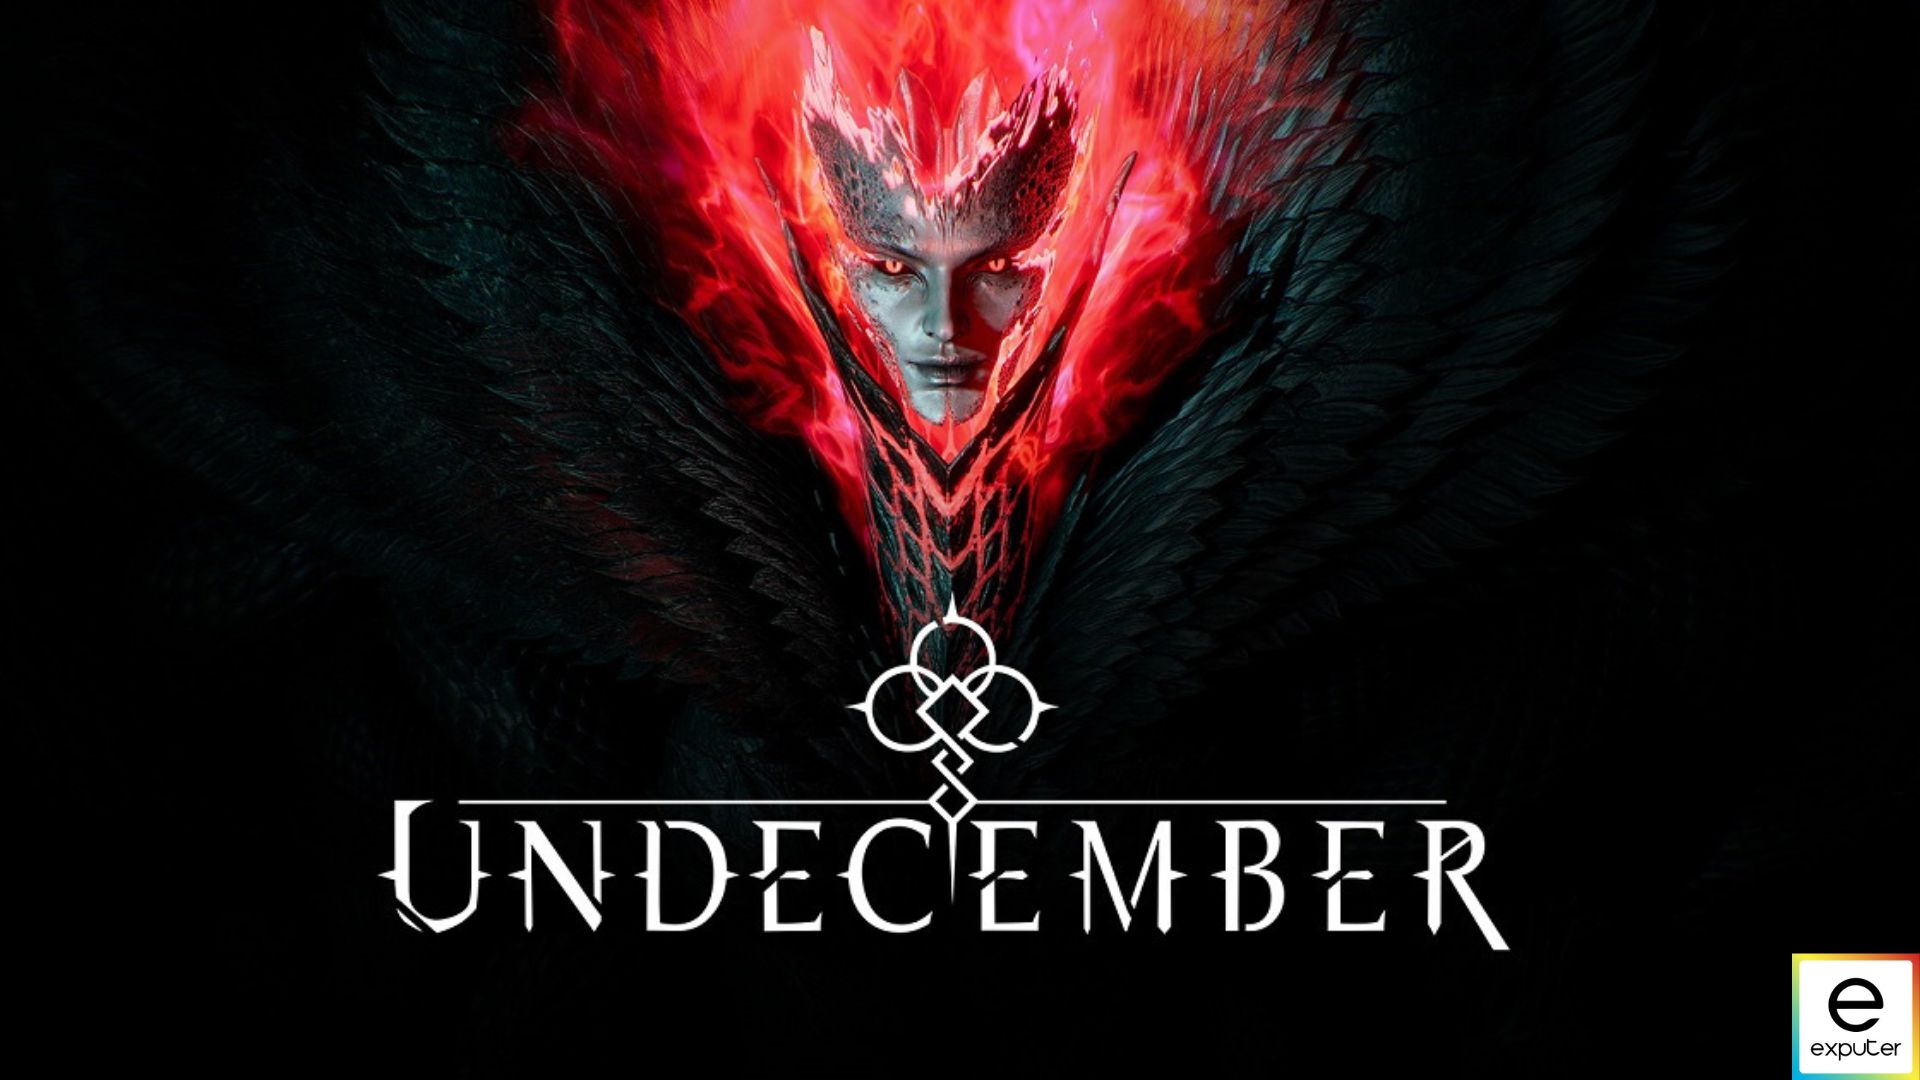 Undecember Review